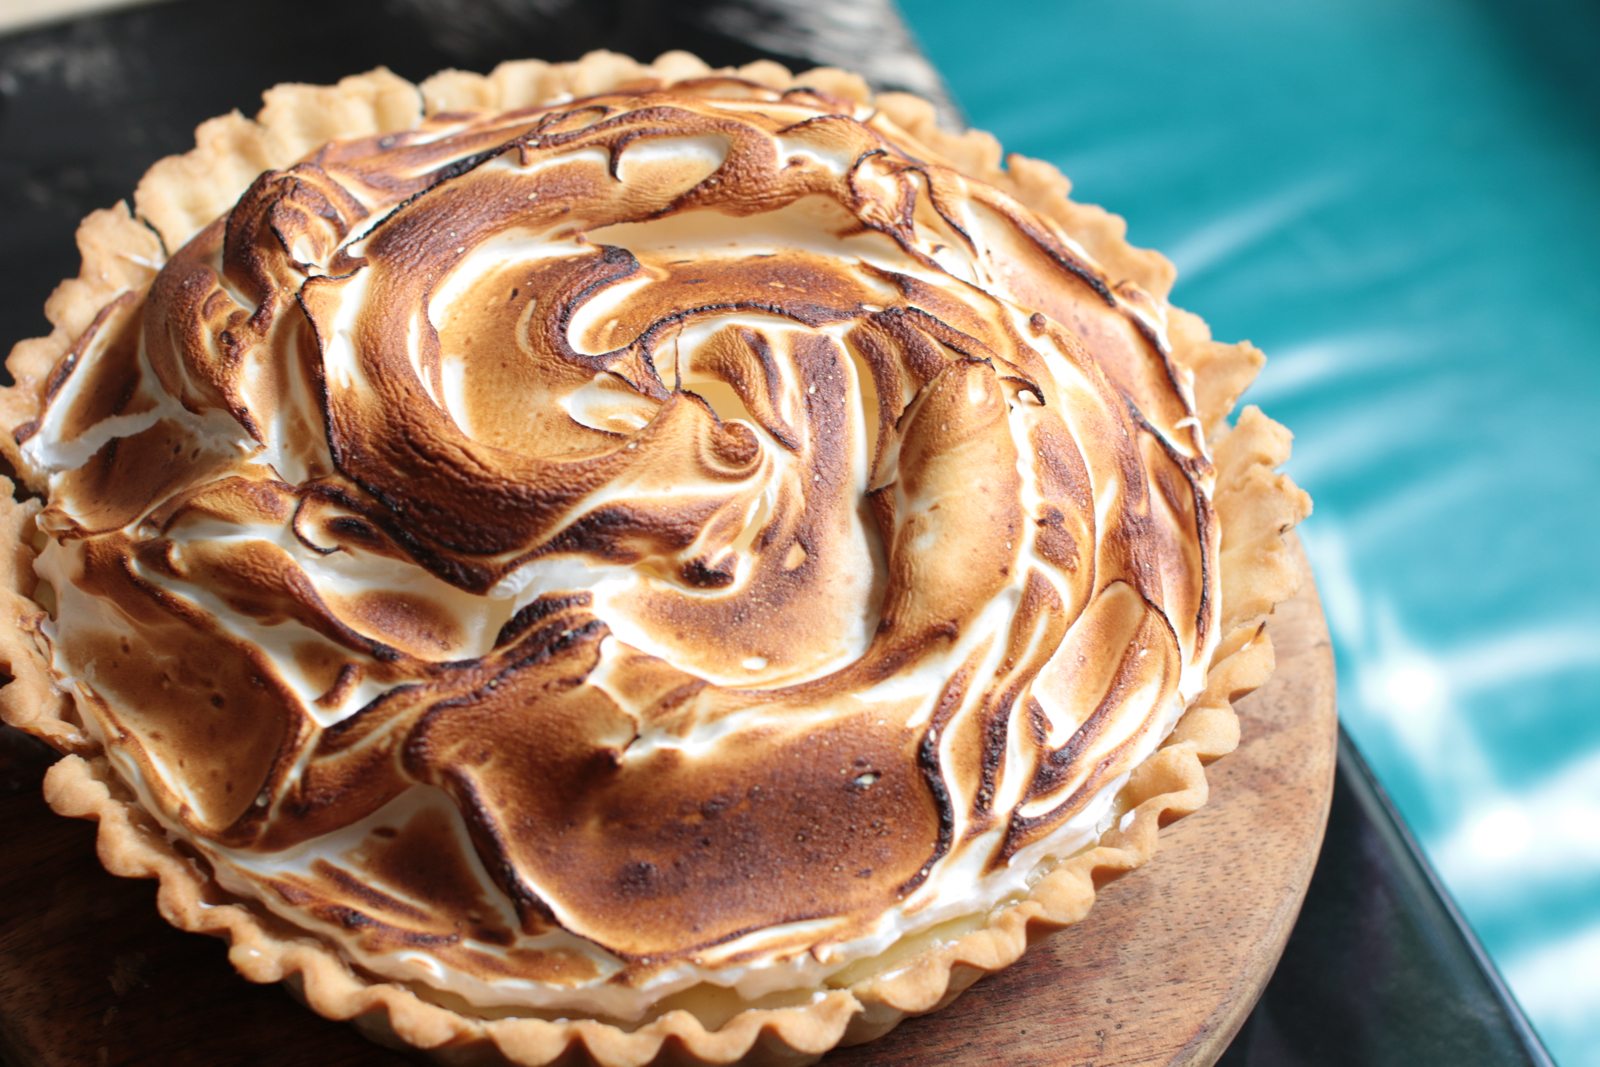 Pies, like this lemon meringue one, are available whole or by the slice.